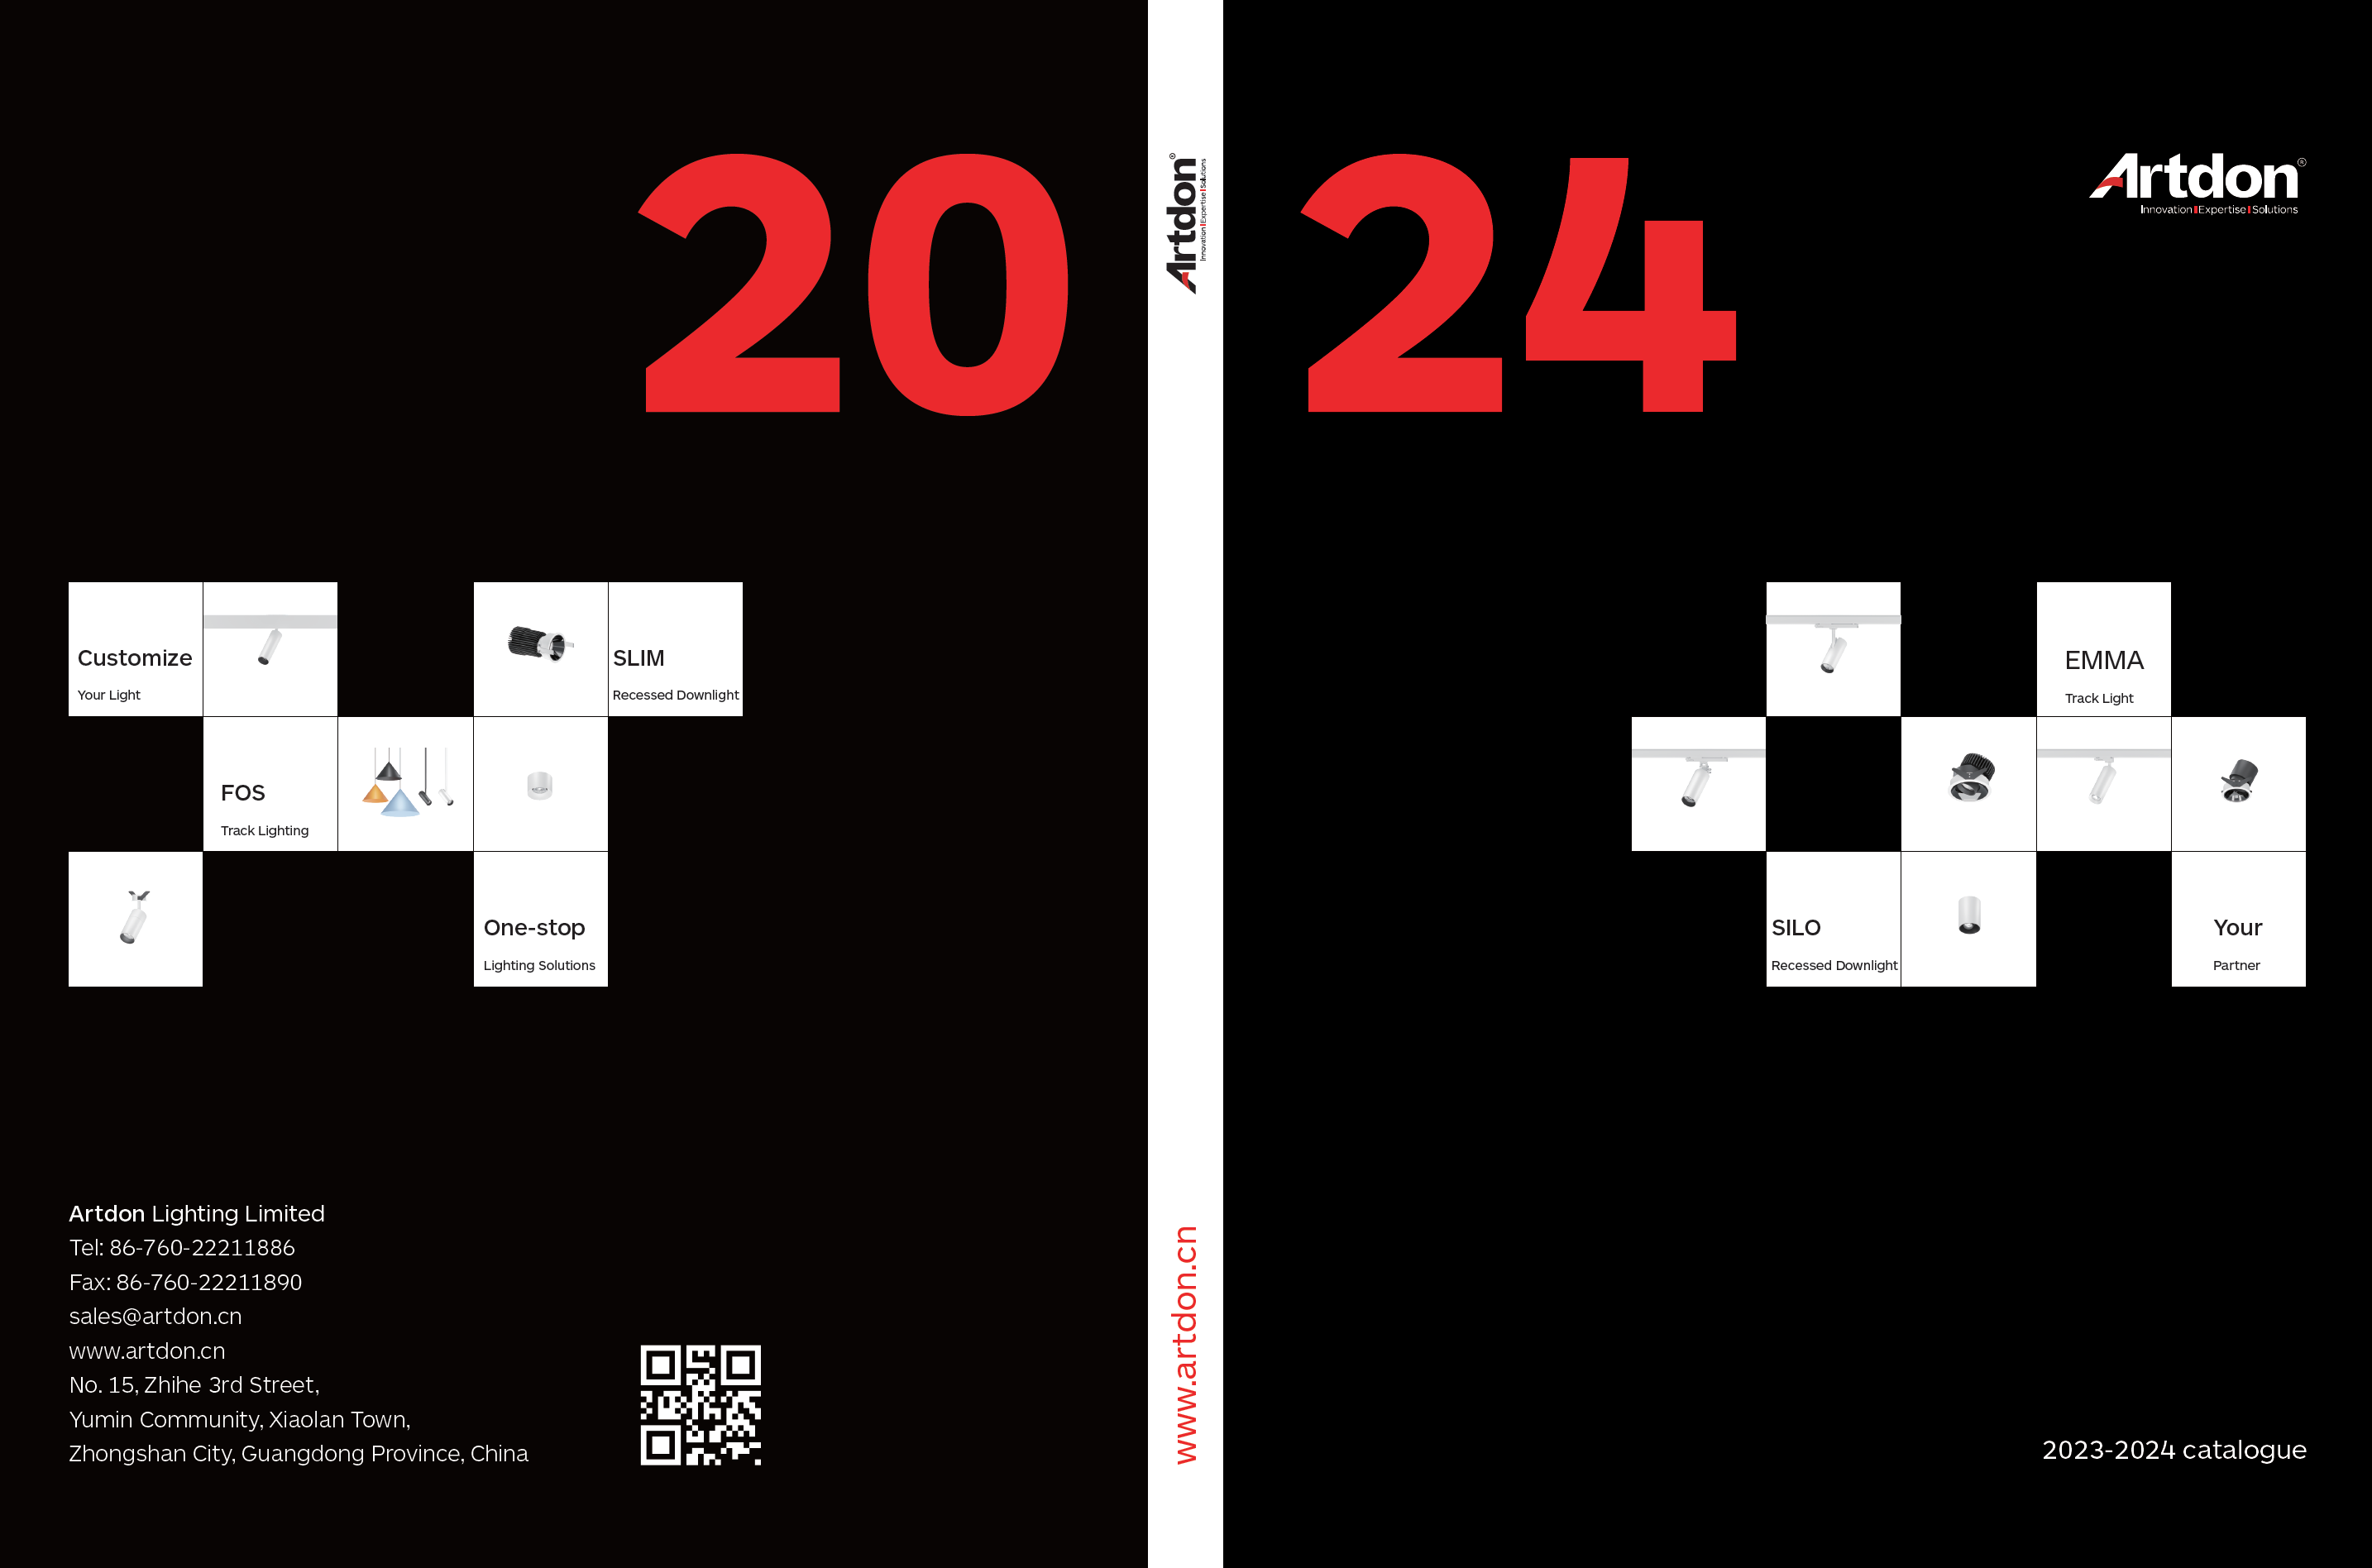 Artdon 2023-2024 New Catalogue Launched